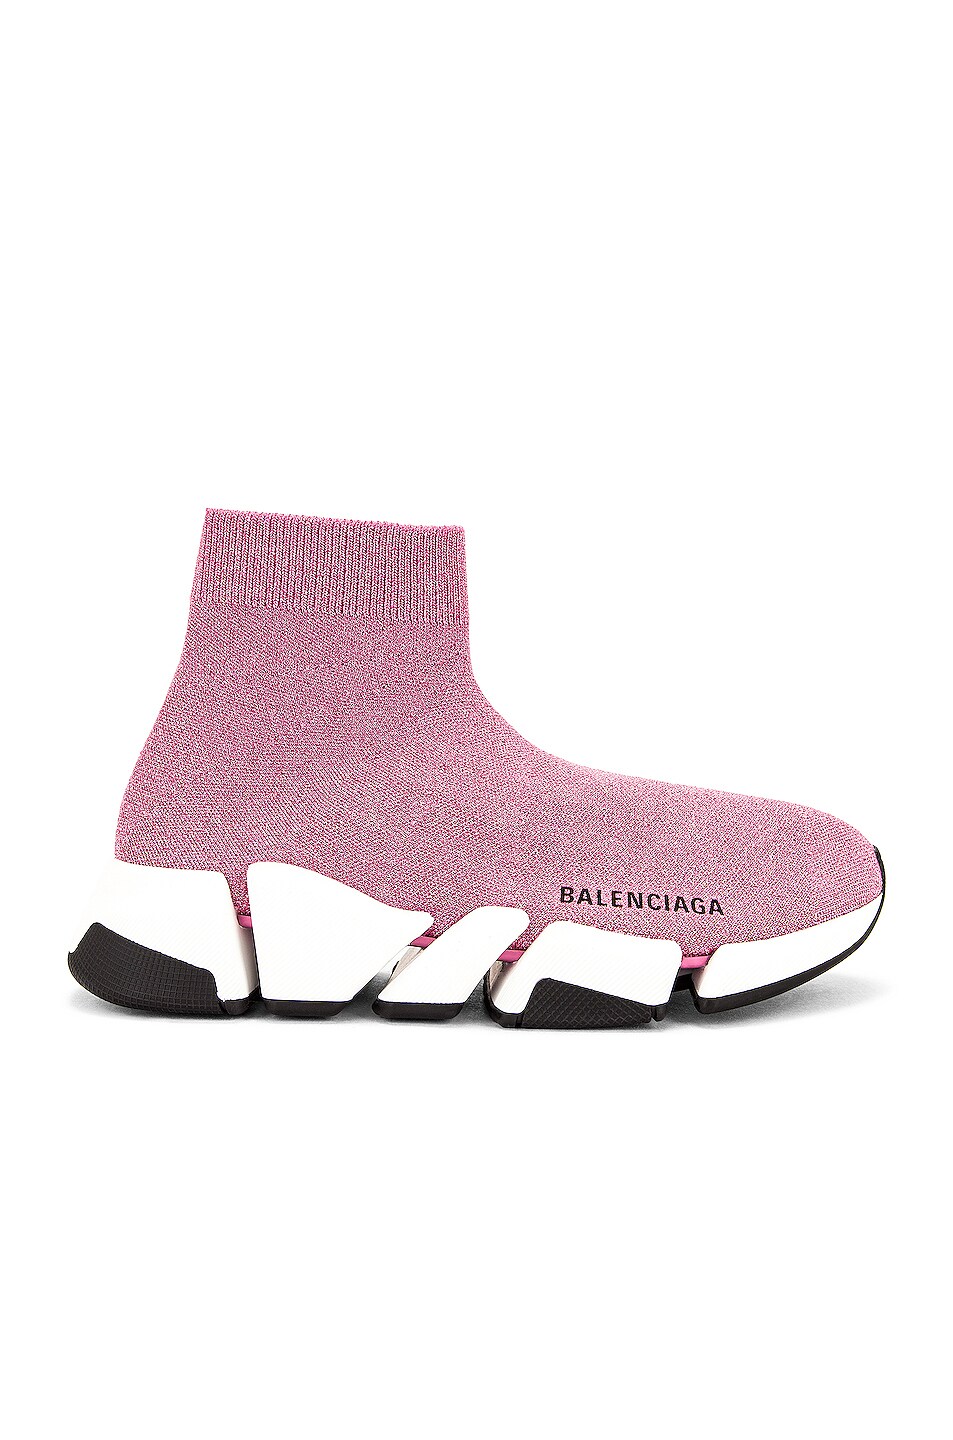 Image 1 of Balenciaga Speed 2.0 LT Sneakers in Pink & White & Black